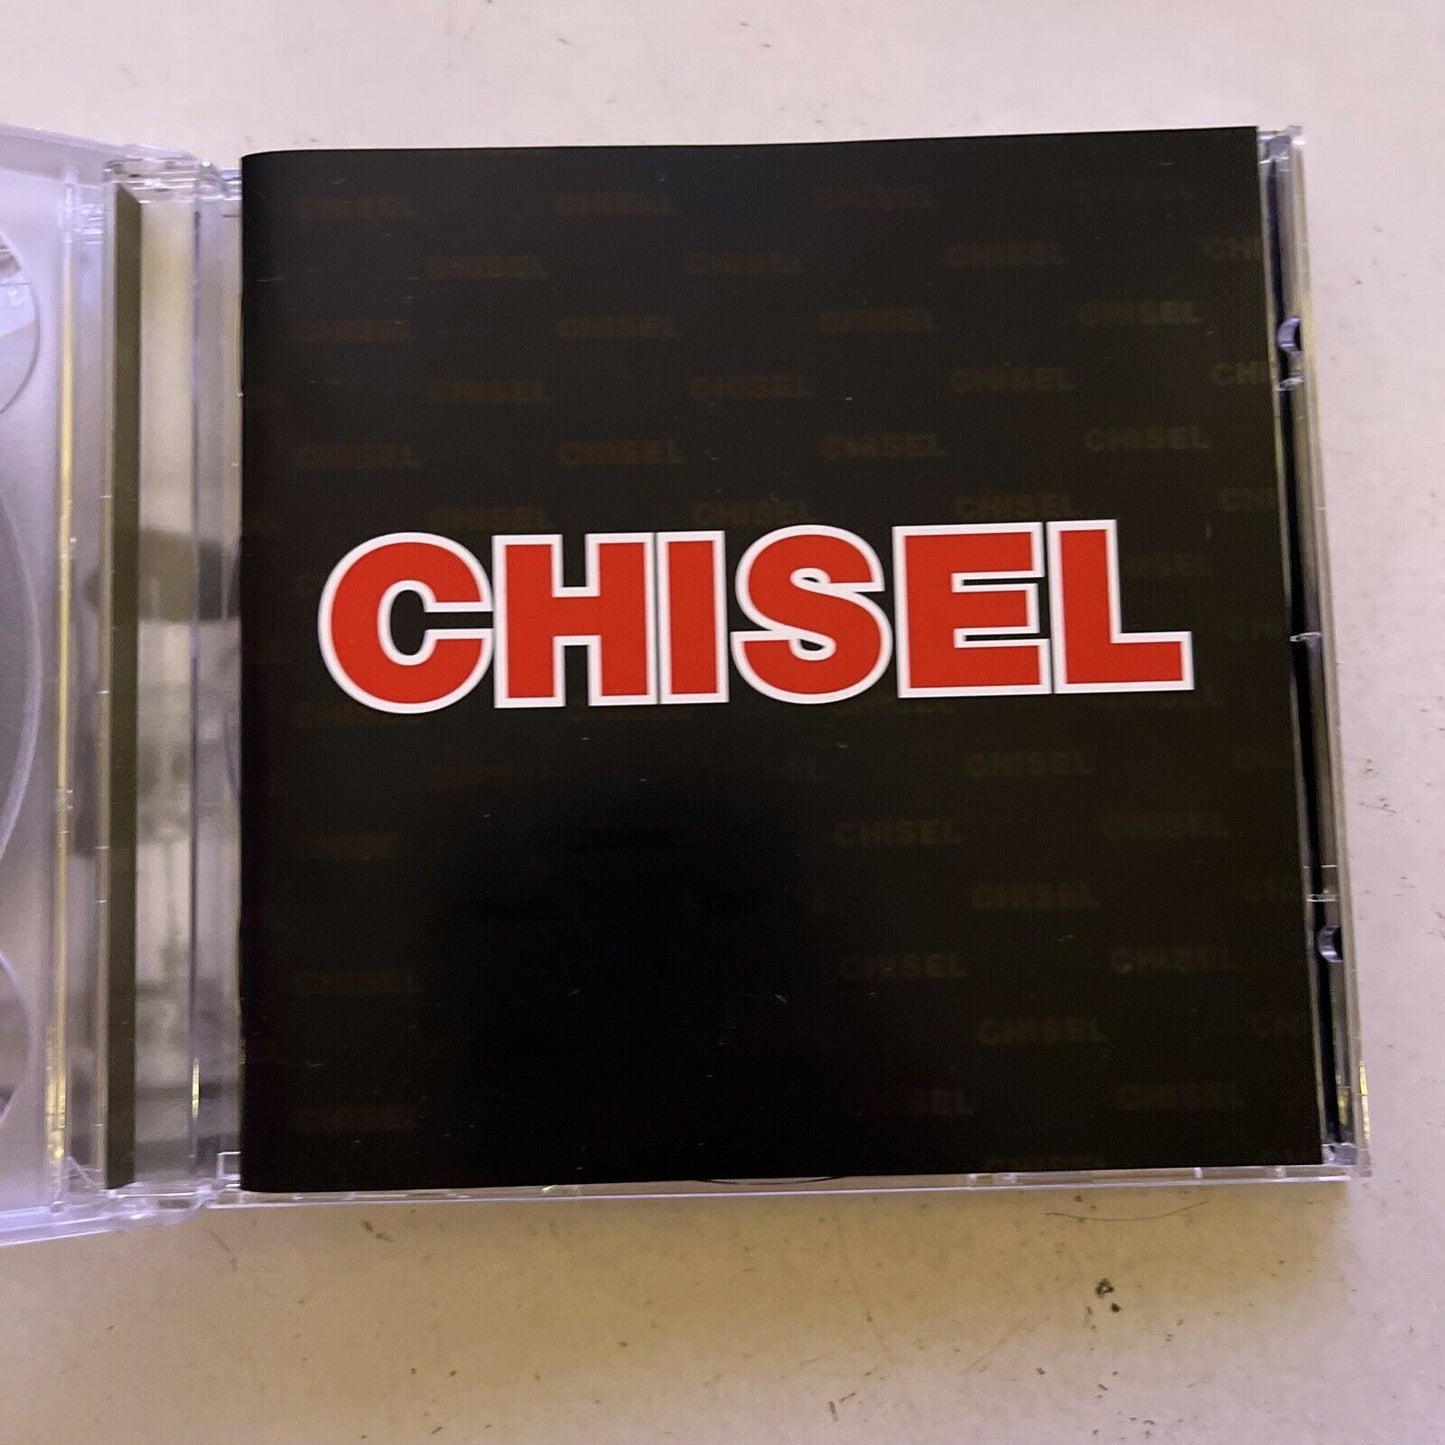 Cold Chisel - Chisel (Greatest Hits) - CD 2-Disc Album 2001